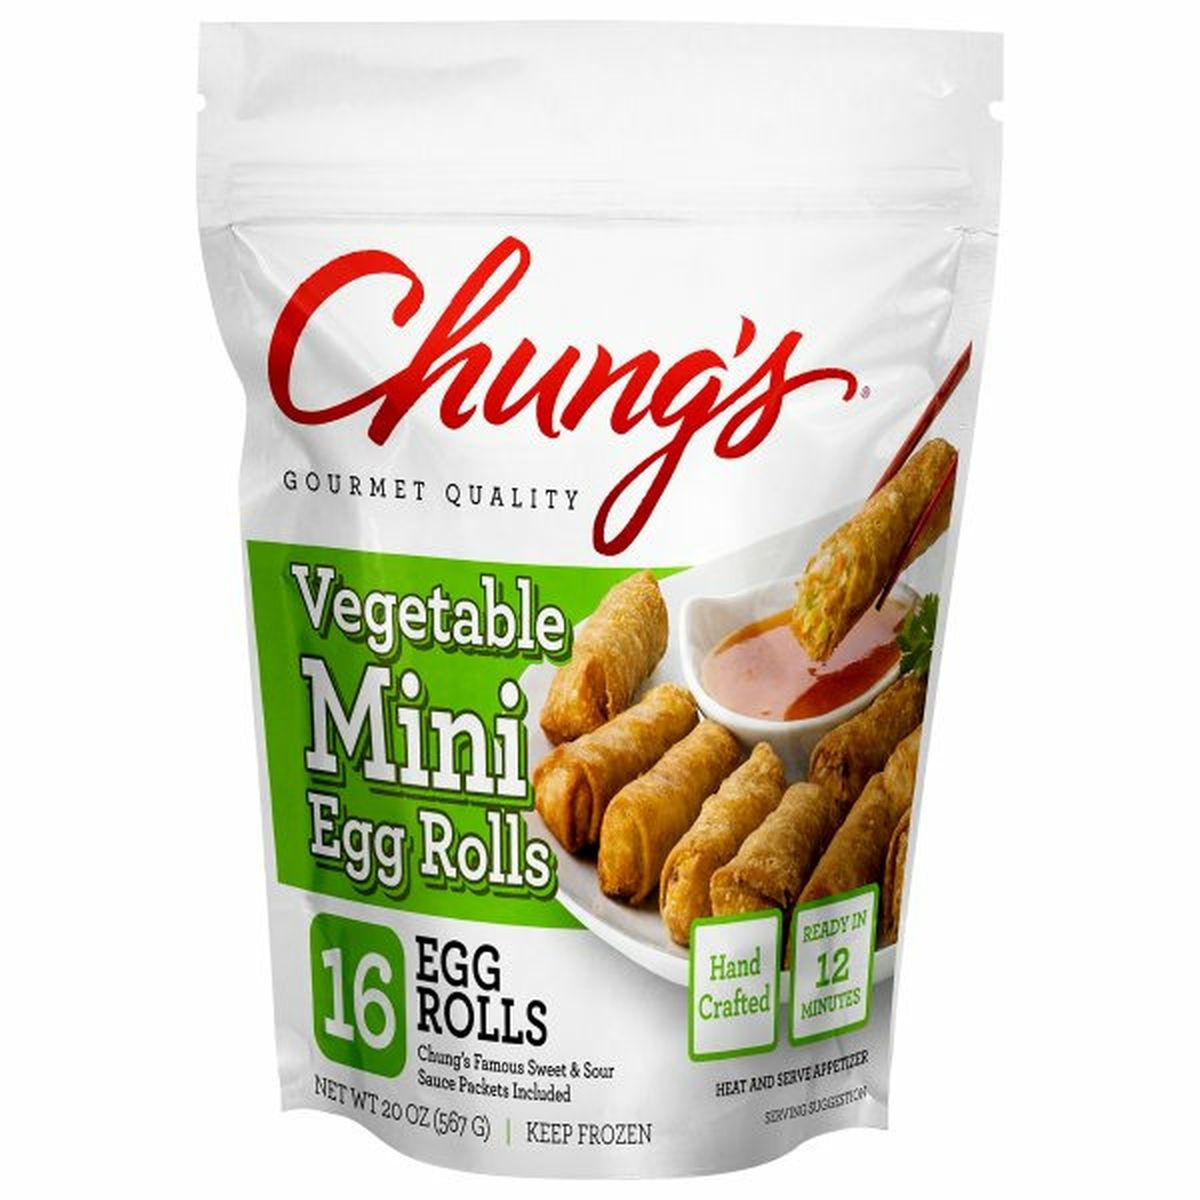 Calories in Chung's Egg Rolls, Vegetable, Mini